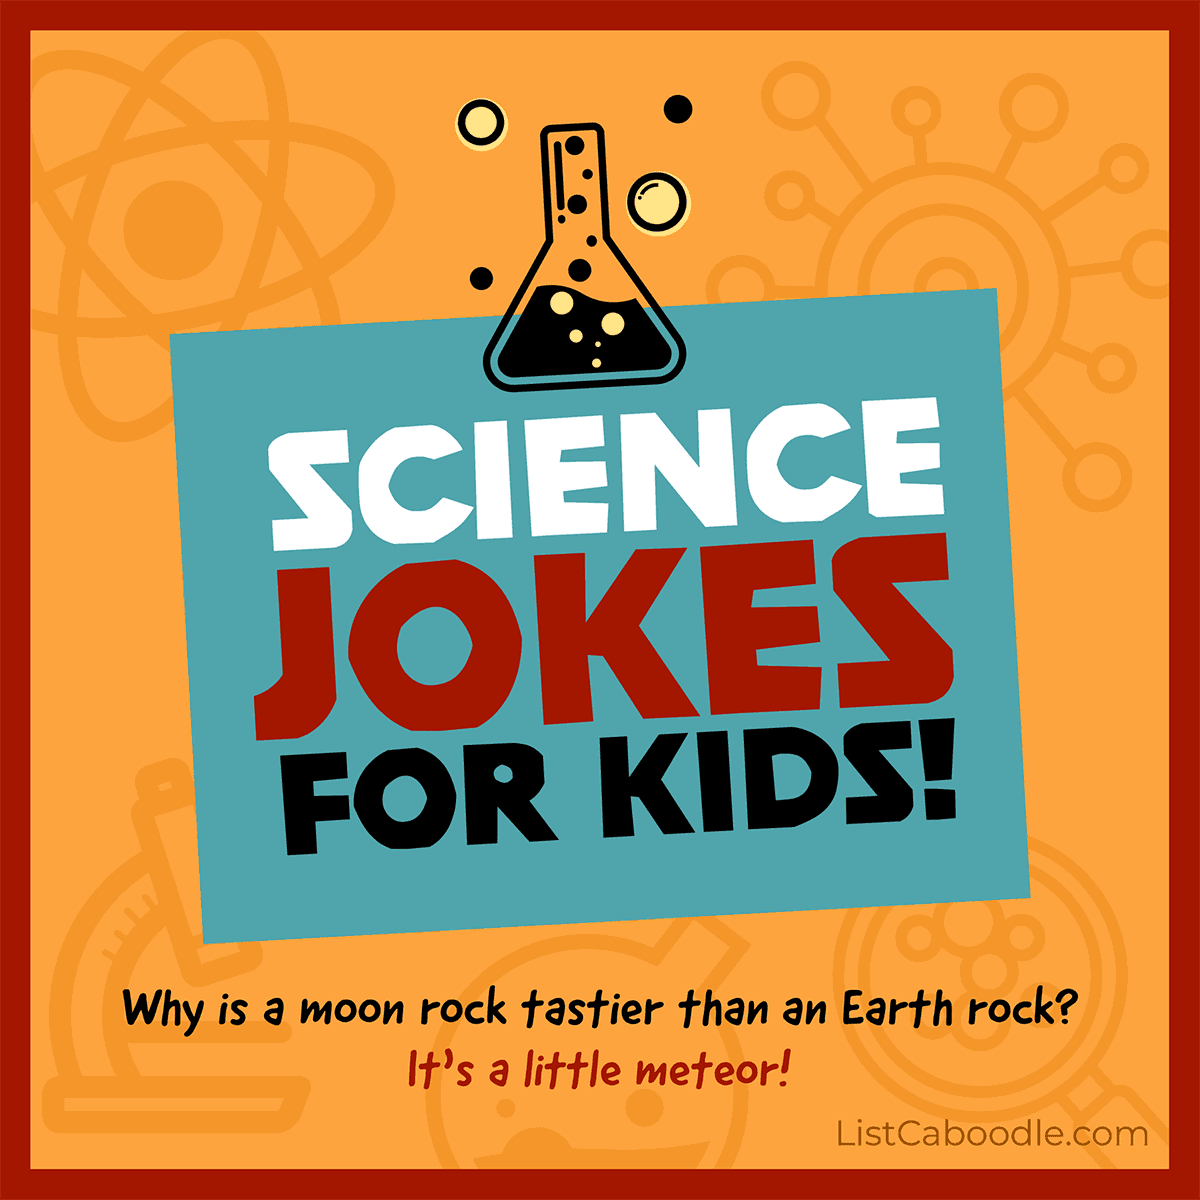 99+ Hilarious Science Jokes For Kids (A Laboratory of Laughs!)